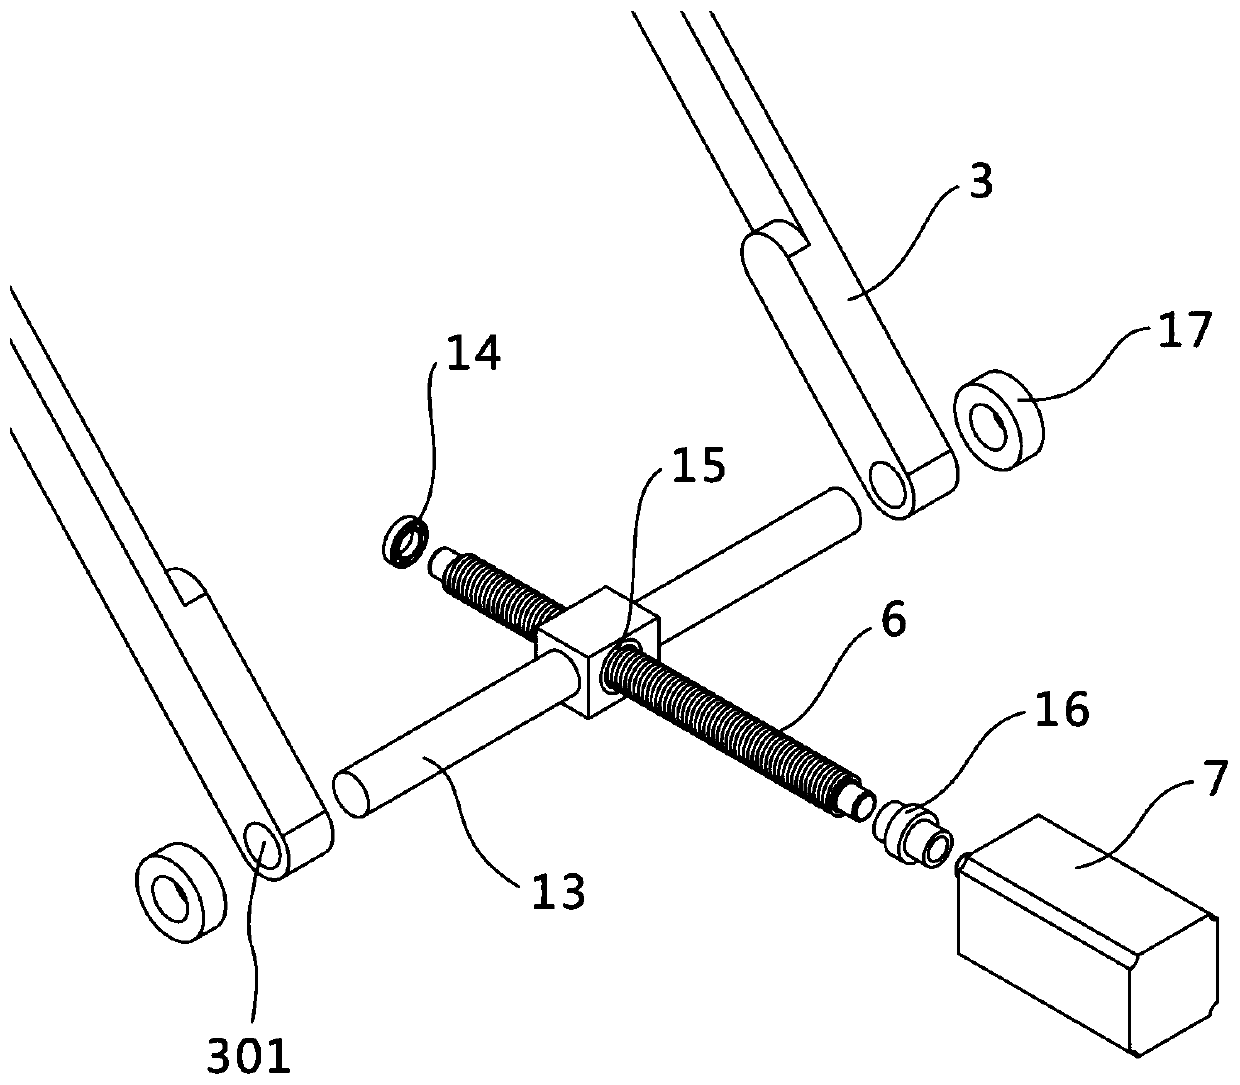 A control system and control method for a medical intelligent stretcher